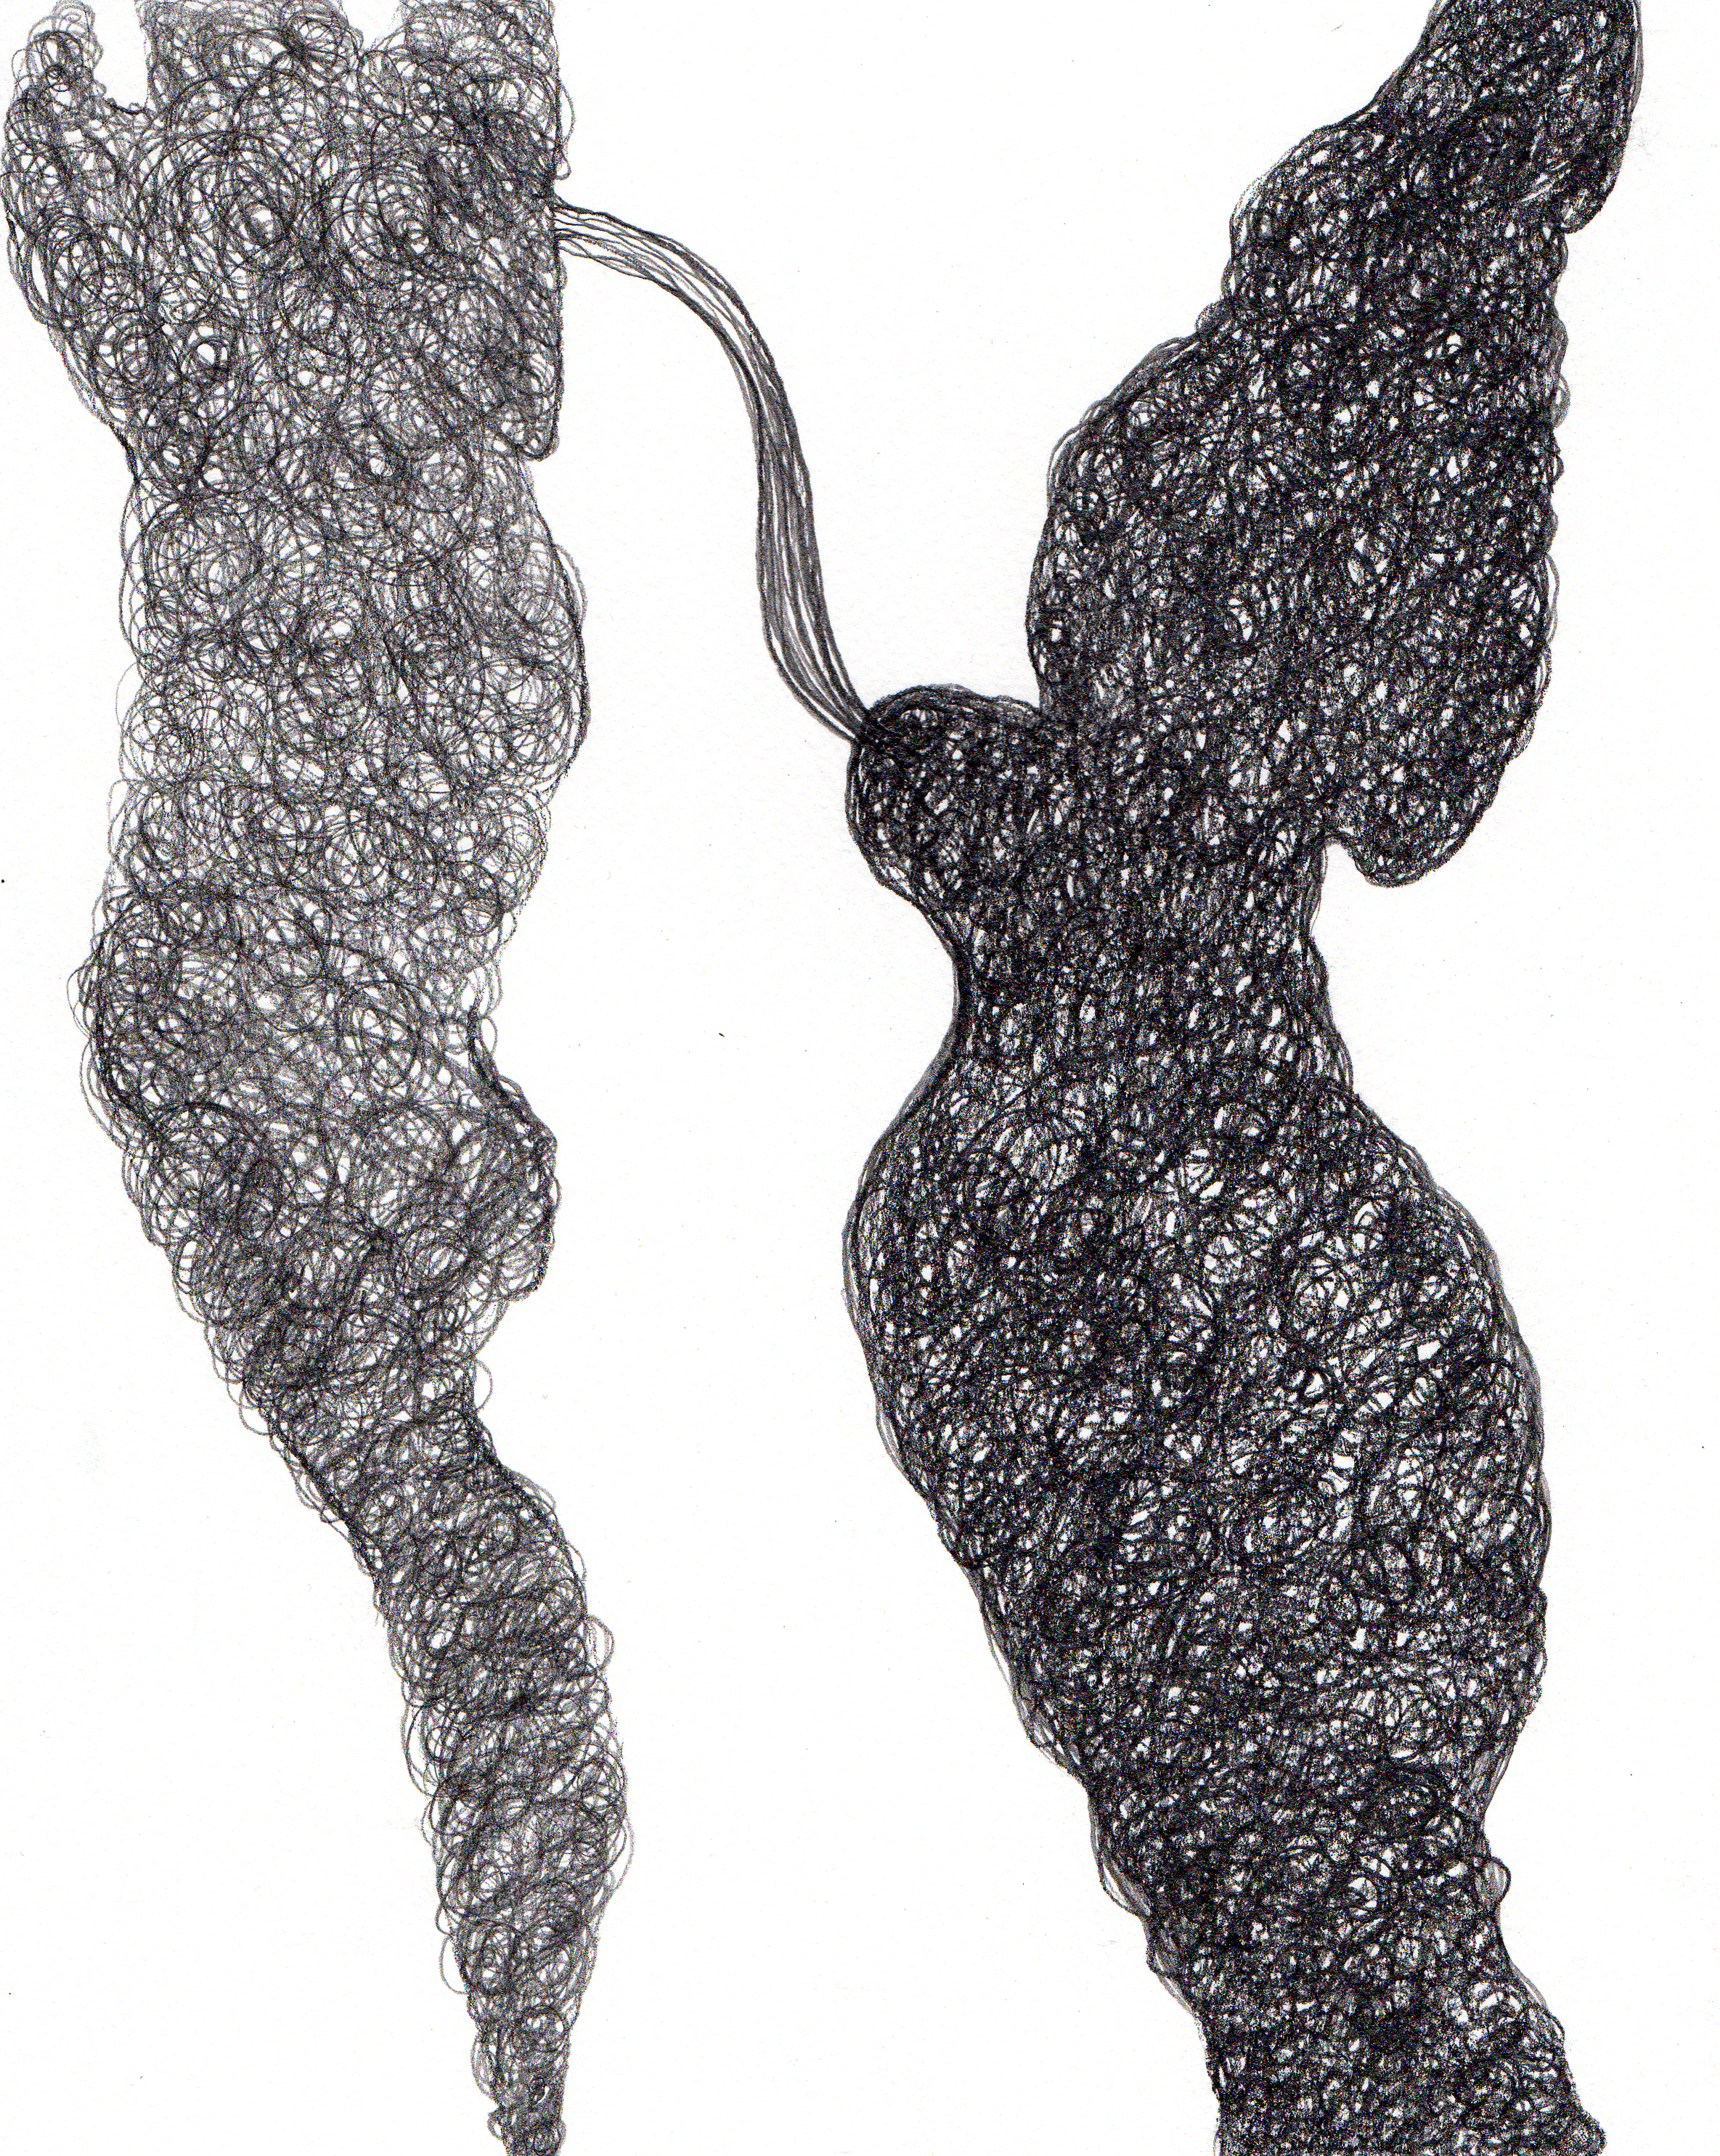    Untitled  , 2014 graphite on paper 9x7 inches 